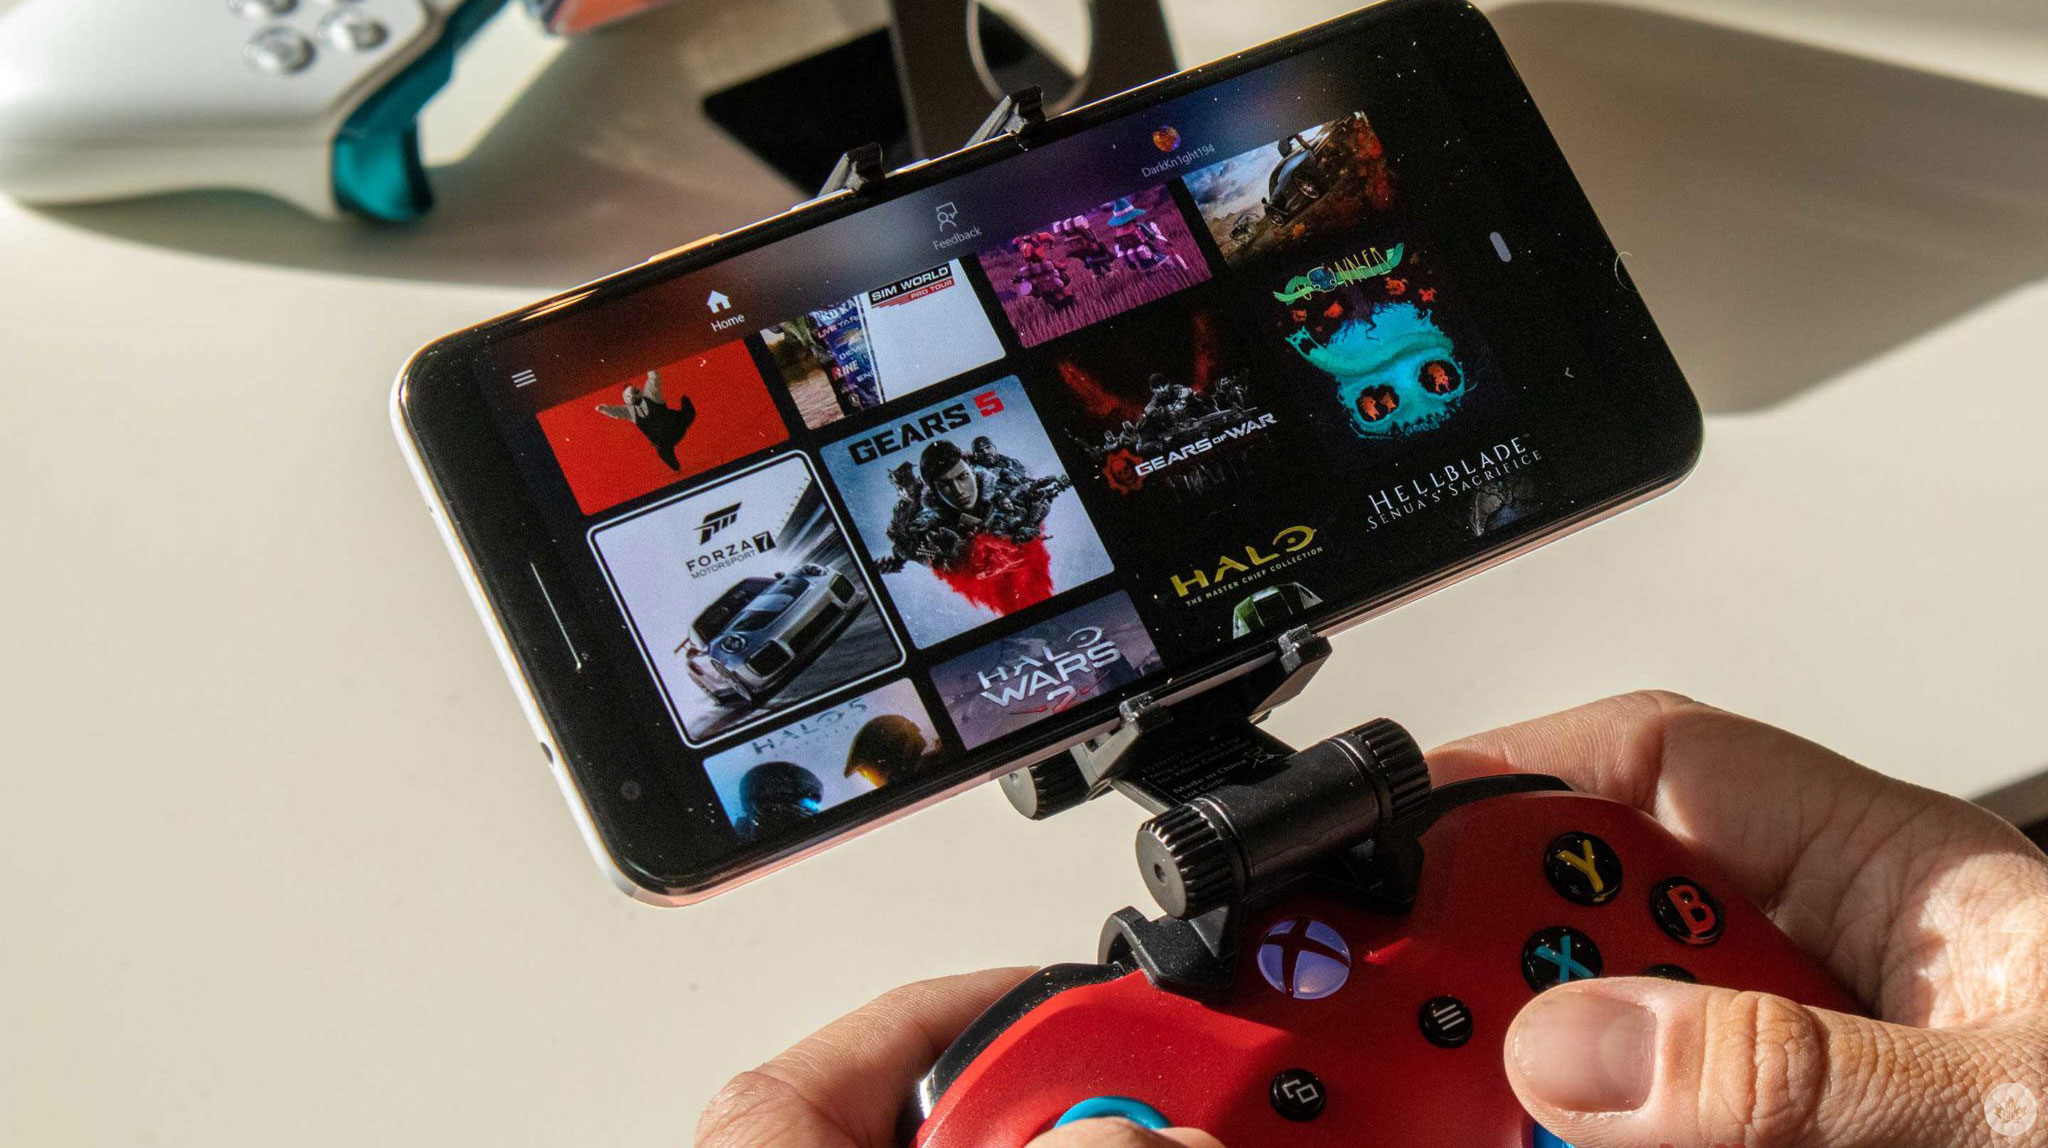 The mobile gaming industry isn’t faring well in terms of downloads and revenue